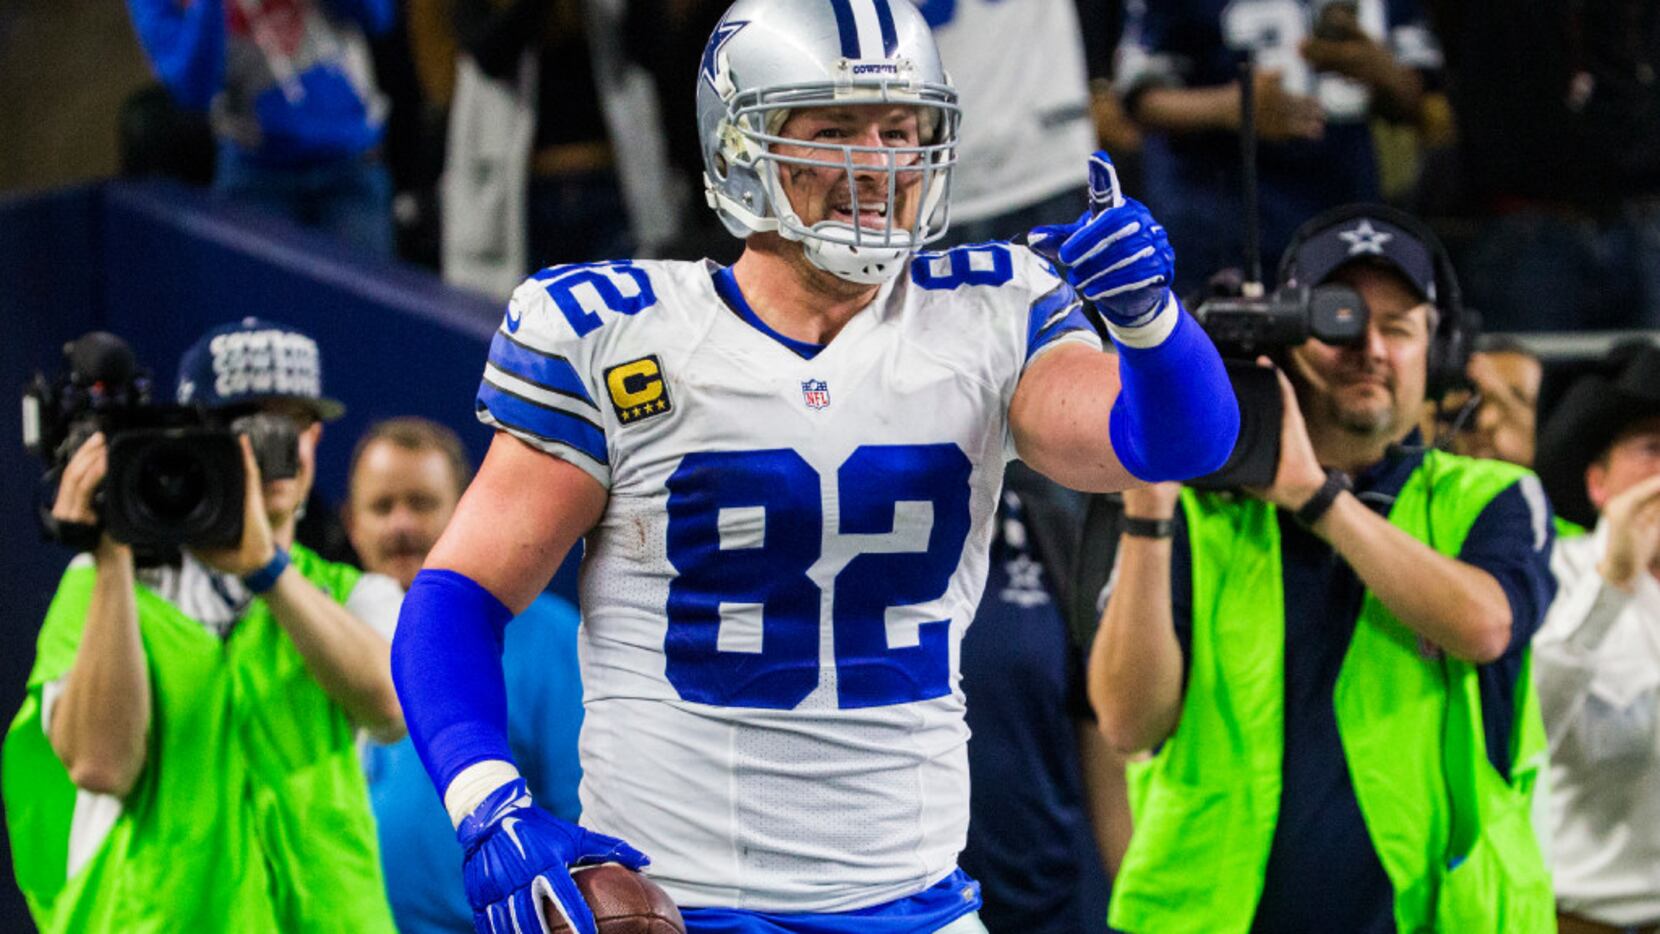 Where does Jason Witten rank among 15 greatest Dallas Cowboys players?